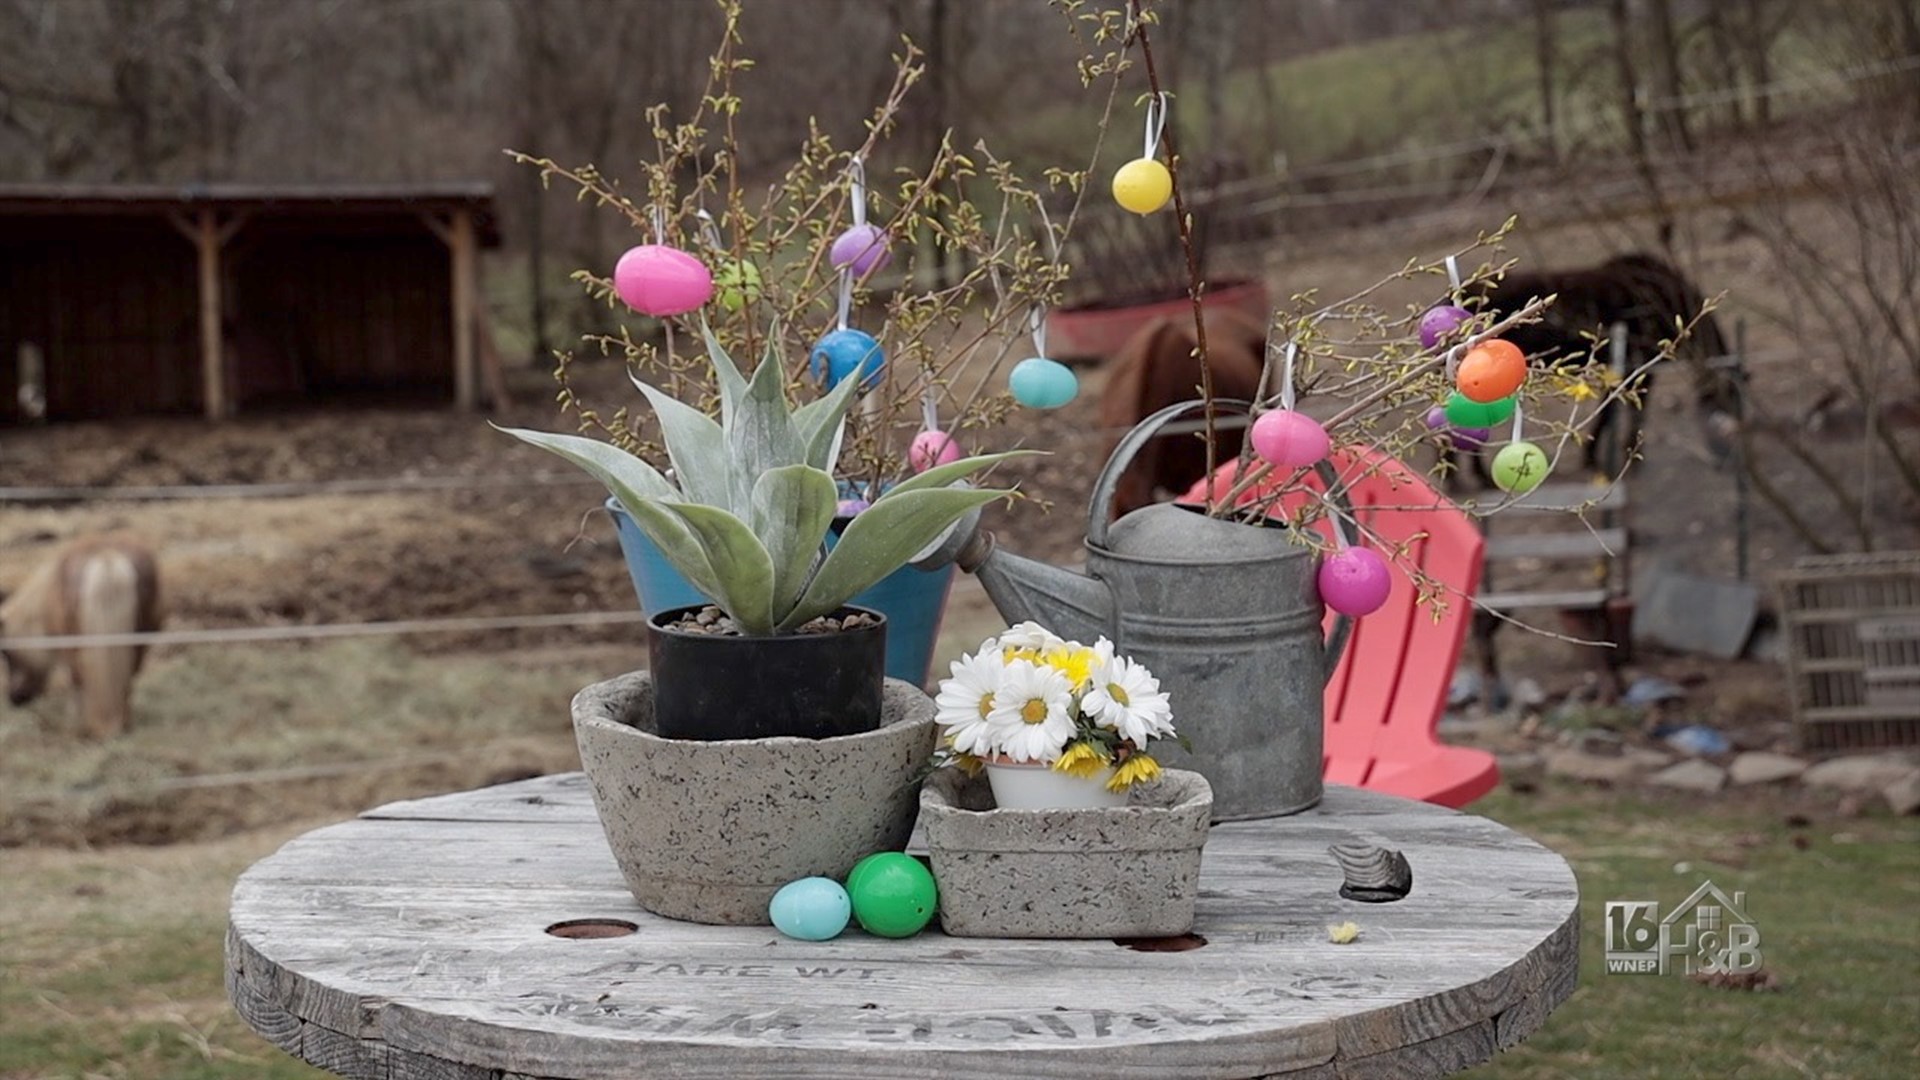 Make A Hypertufa Planter With Mickey's Crafts